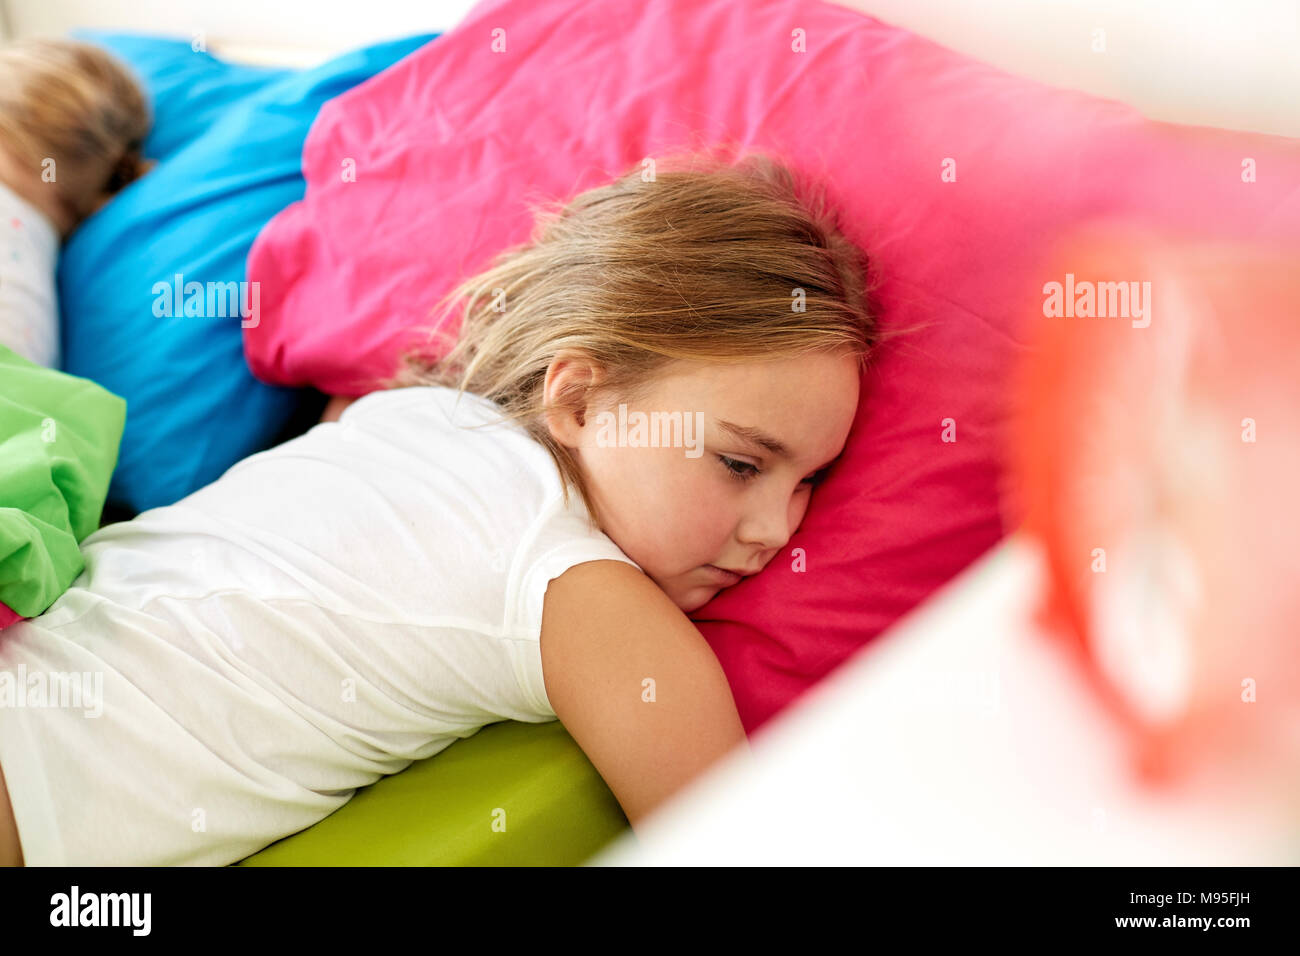 Little girl lying awake in bed at home Banque D'Images